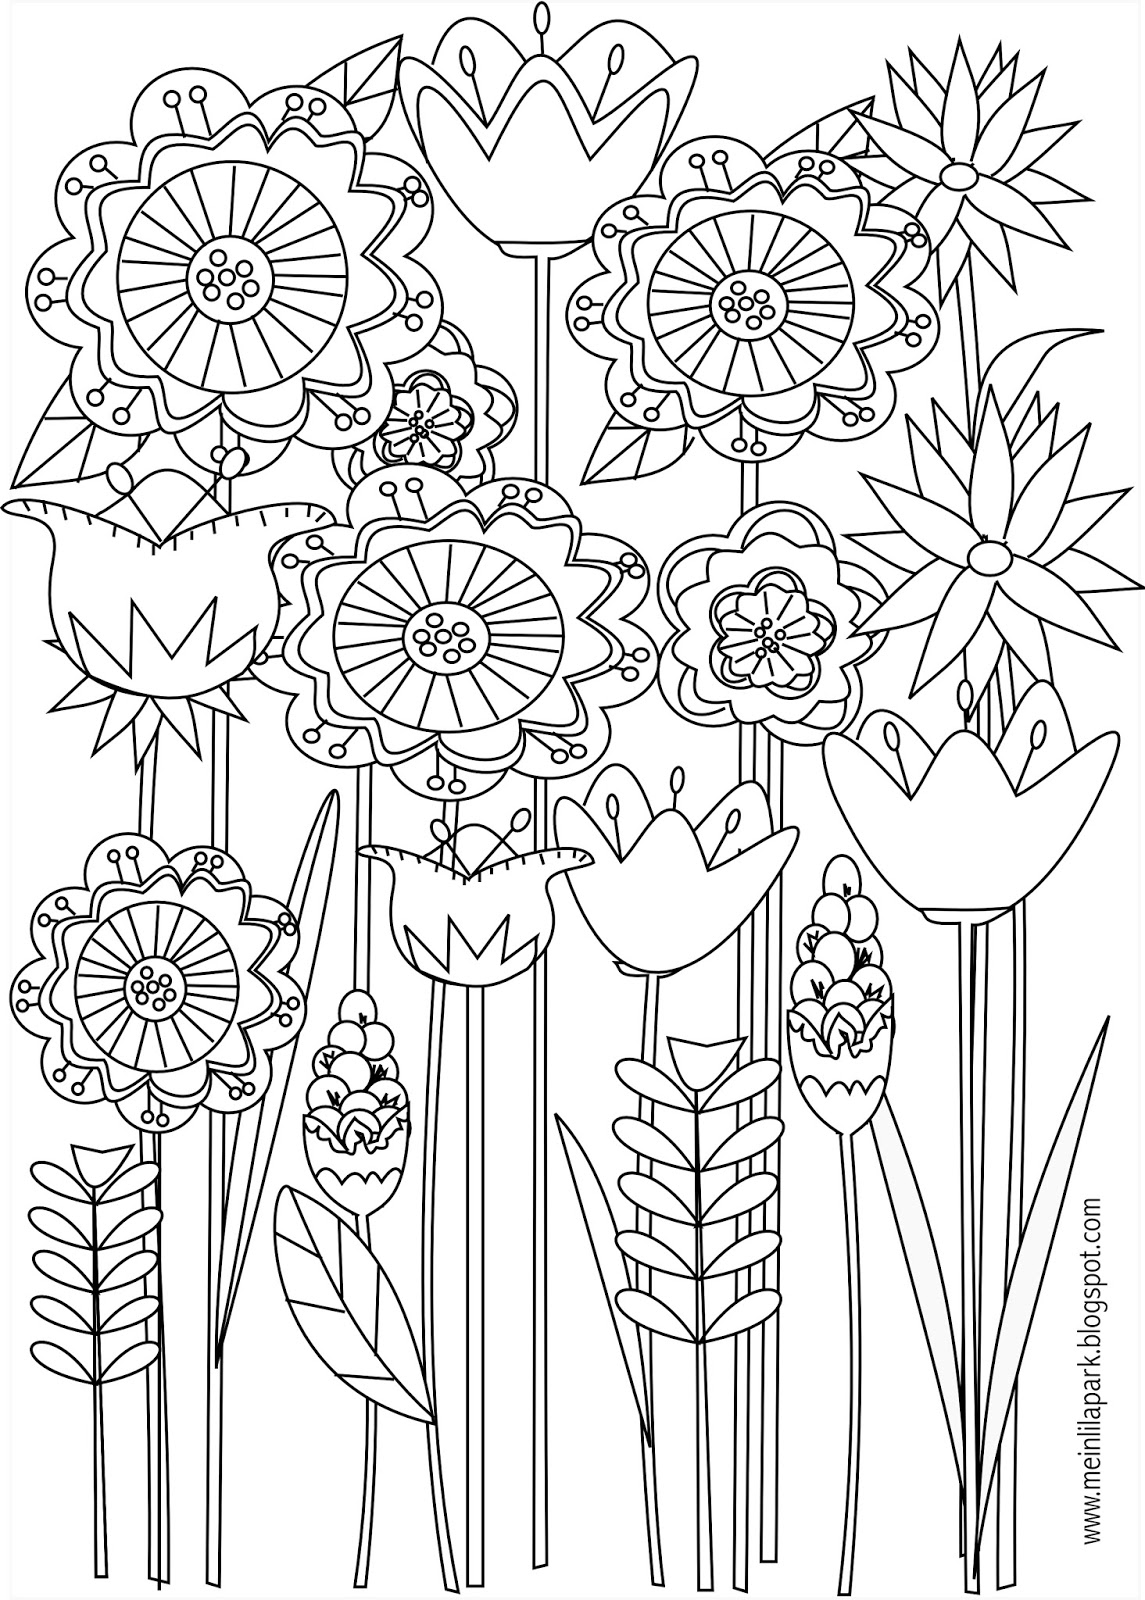 Free printable floral coloring page - ausdruckbare ...